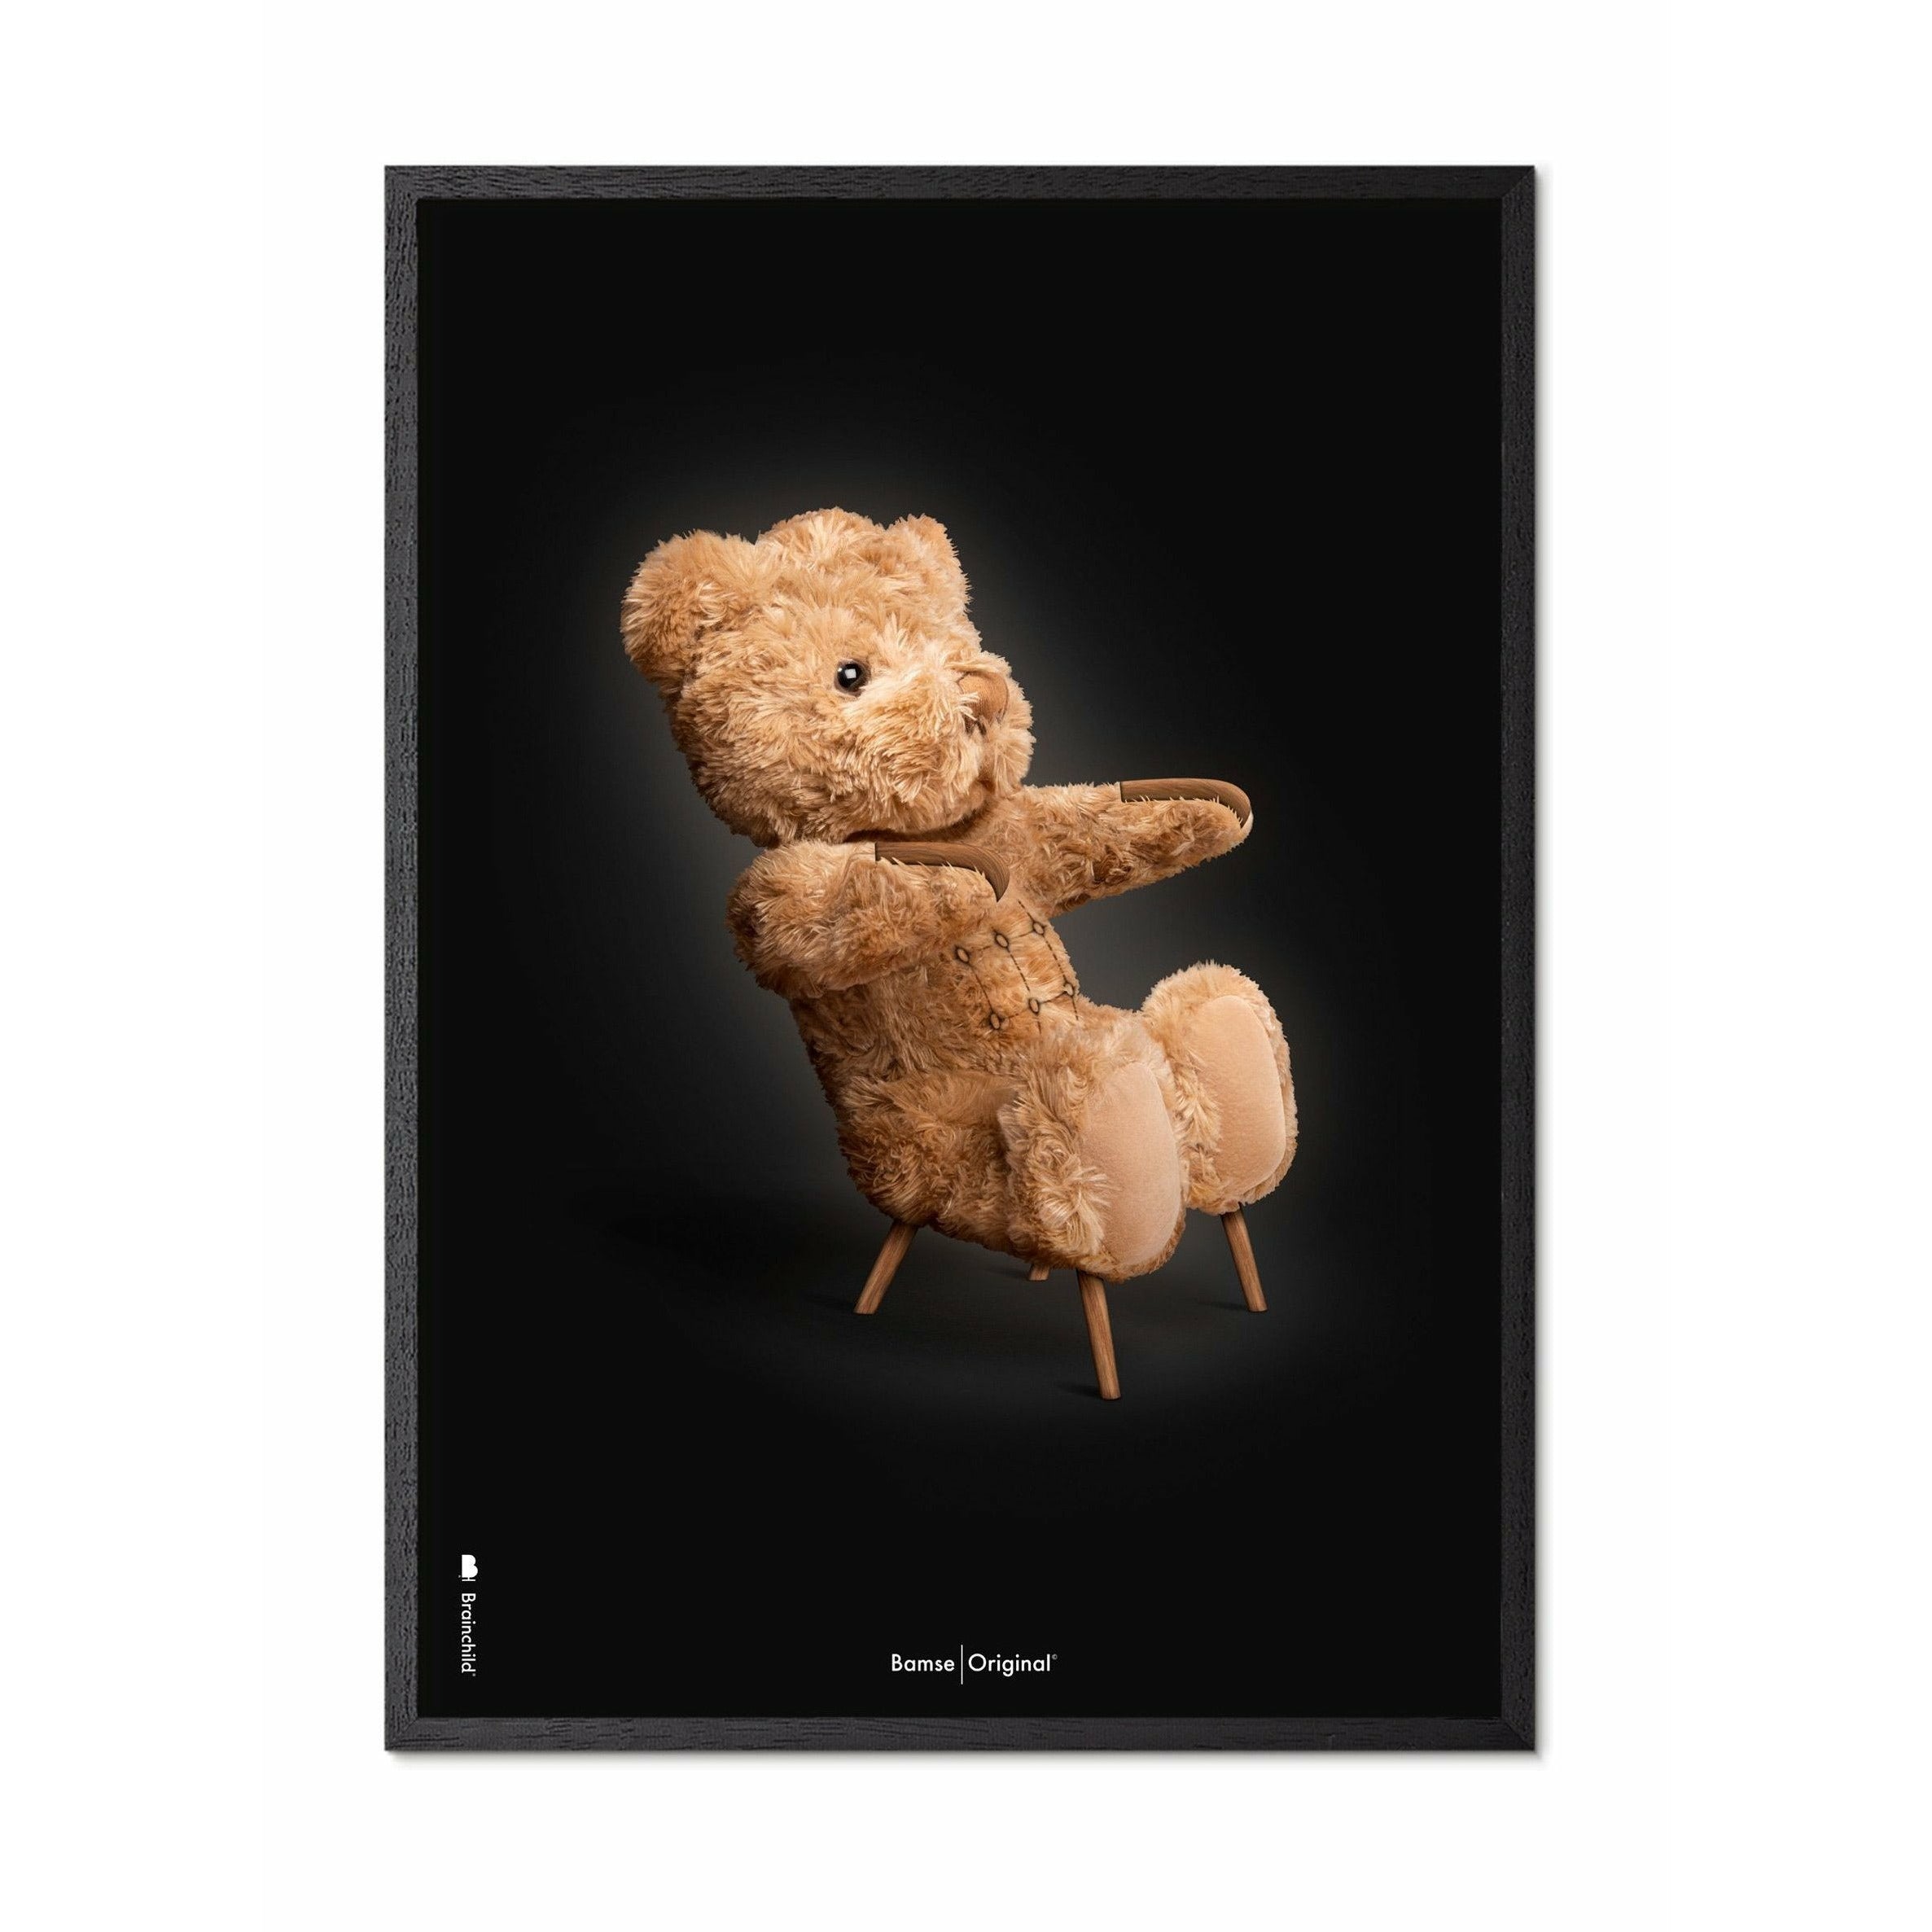 Brainchild Teddy Bear Classic Poster, Frame In Black Lacquered Wood 50x70 Cm, Black Background